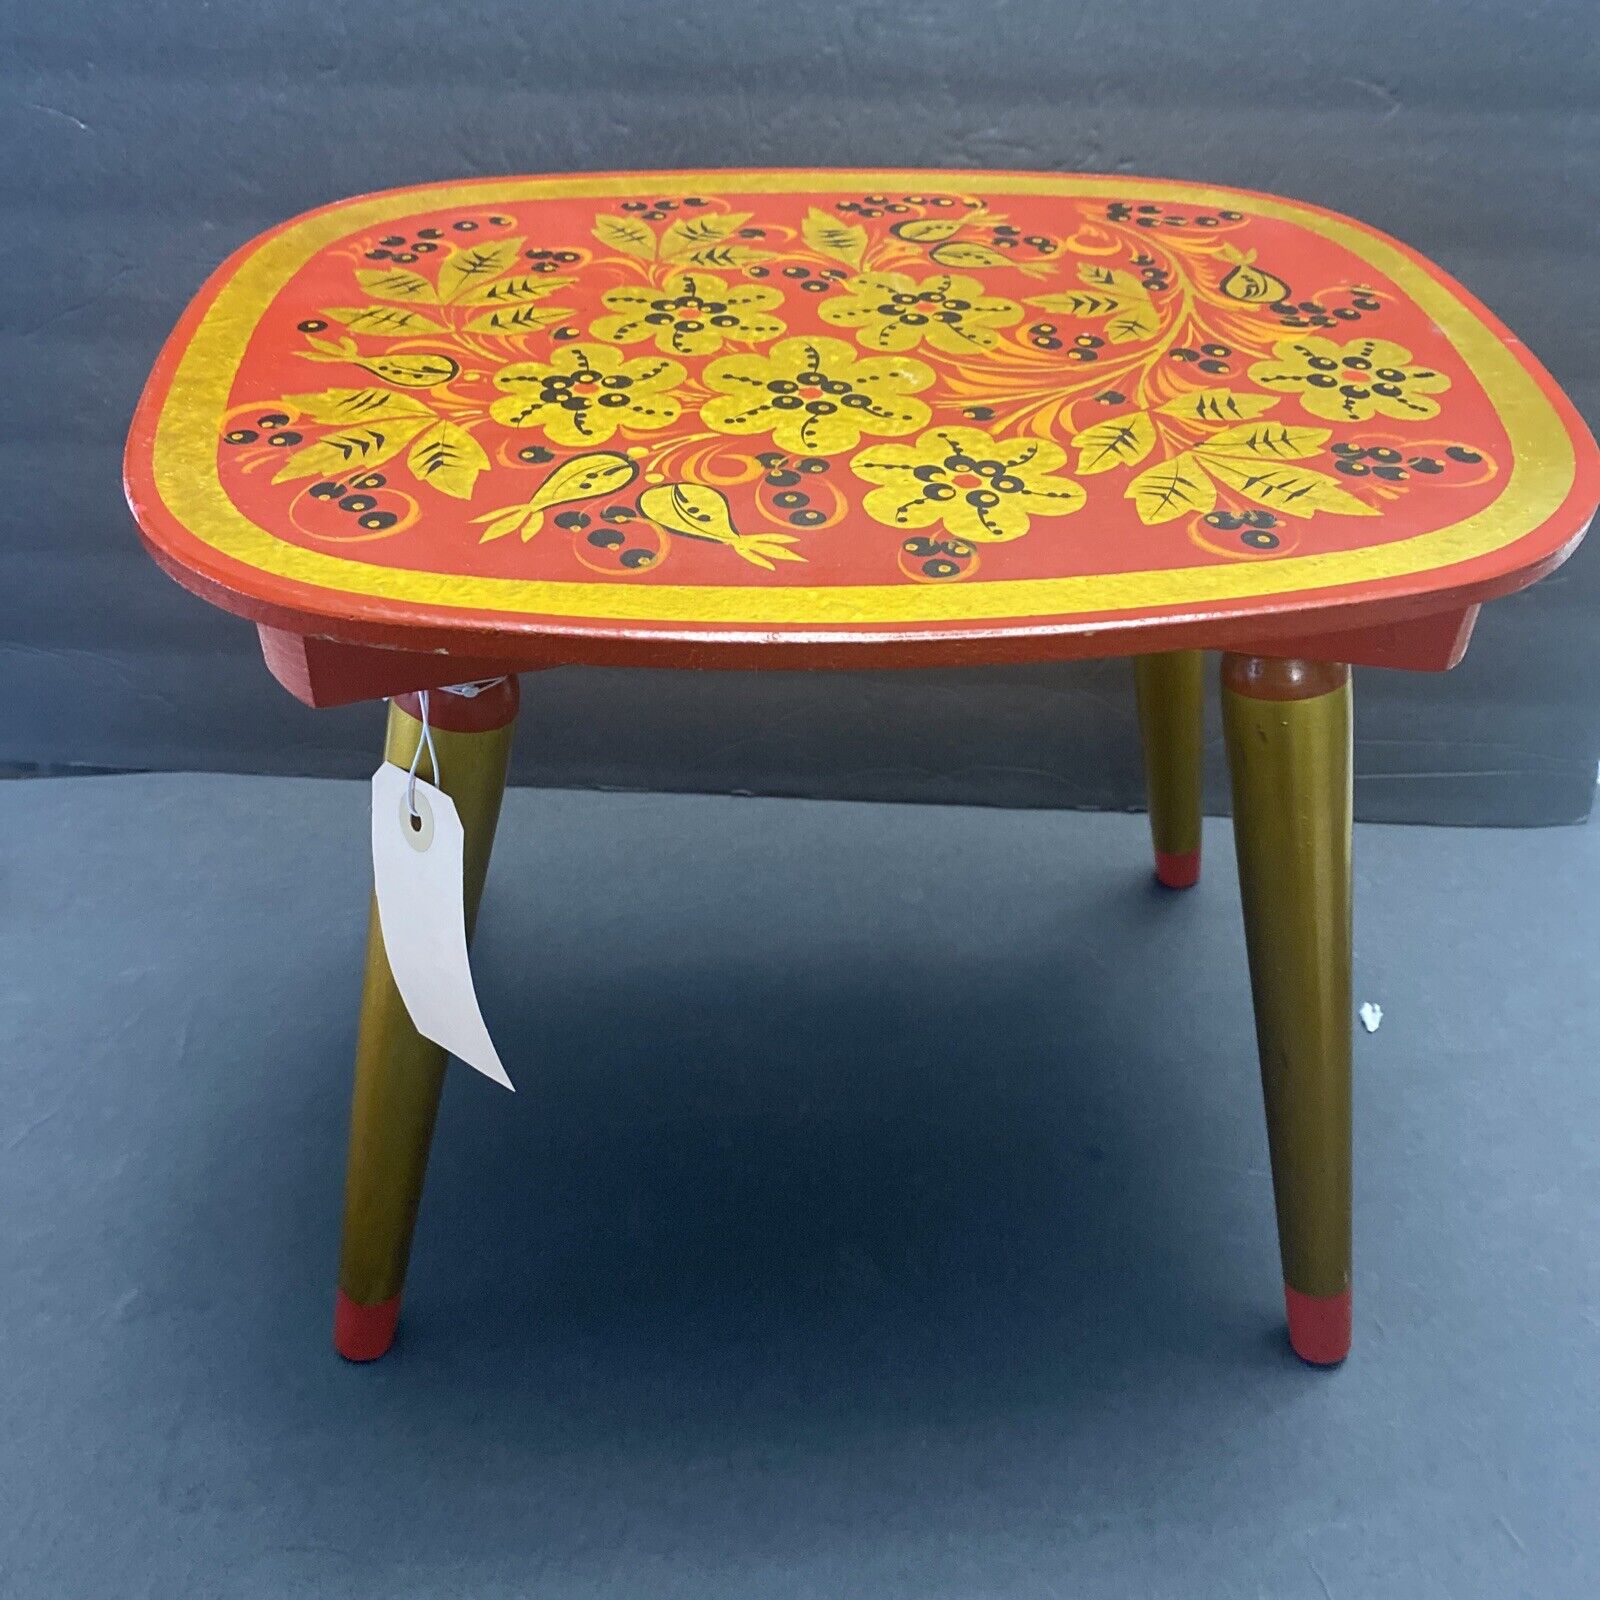 Rare Vintage Khokhloma Russian Hand Painted Folk Art Wooden Lacquer Stool/table